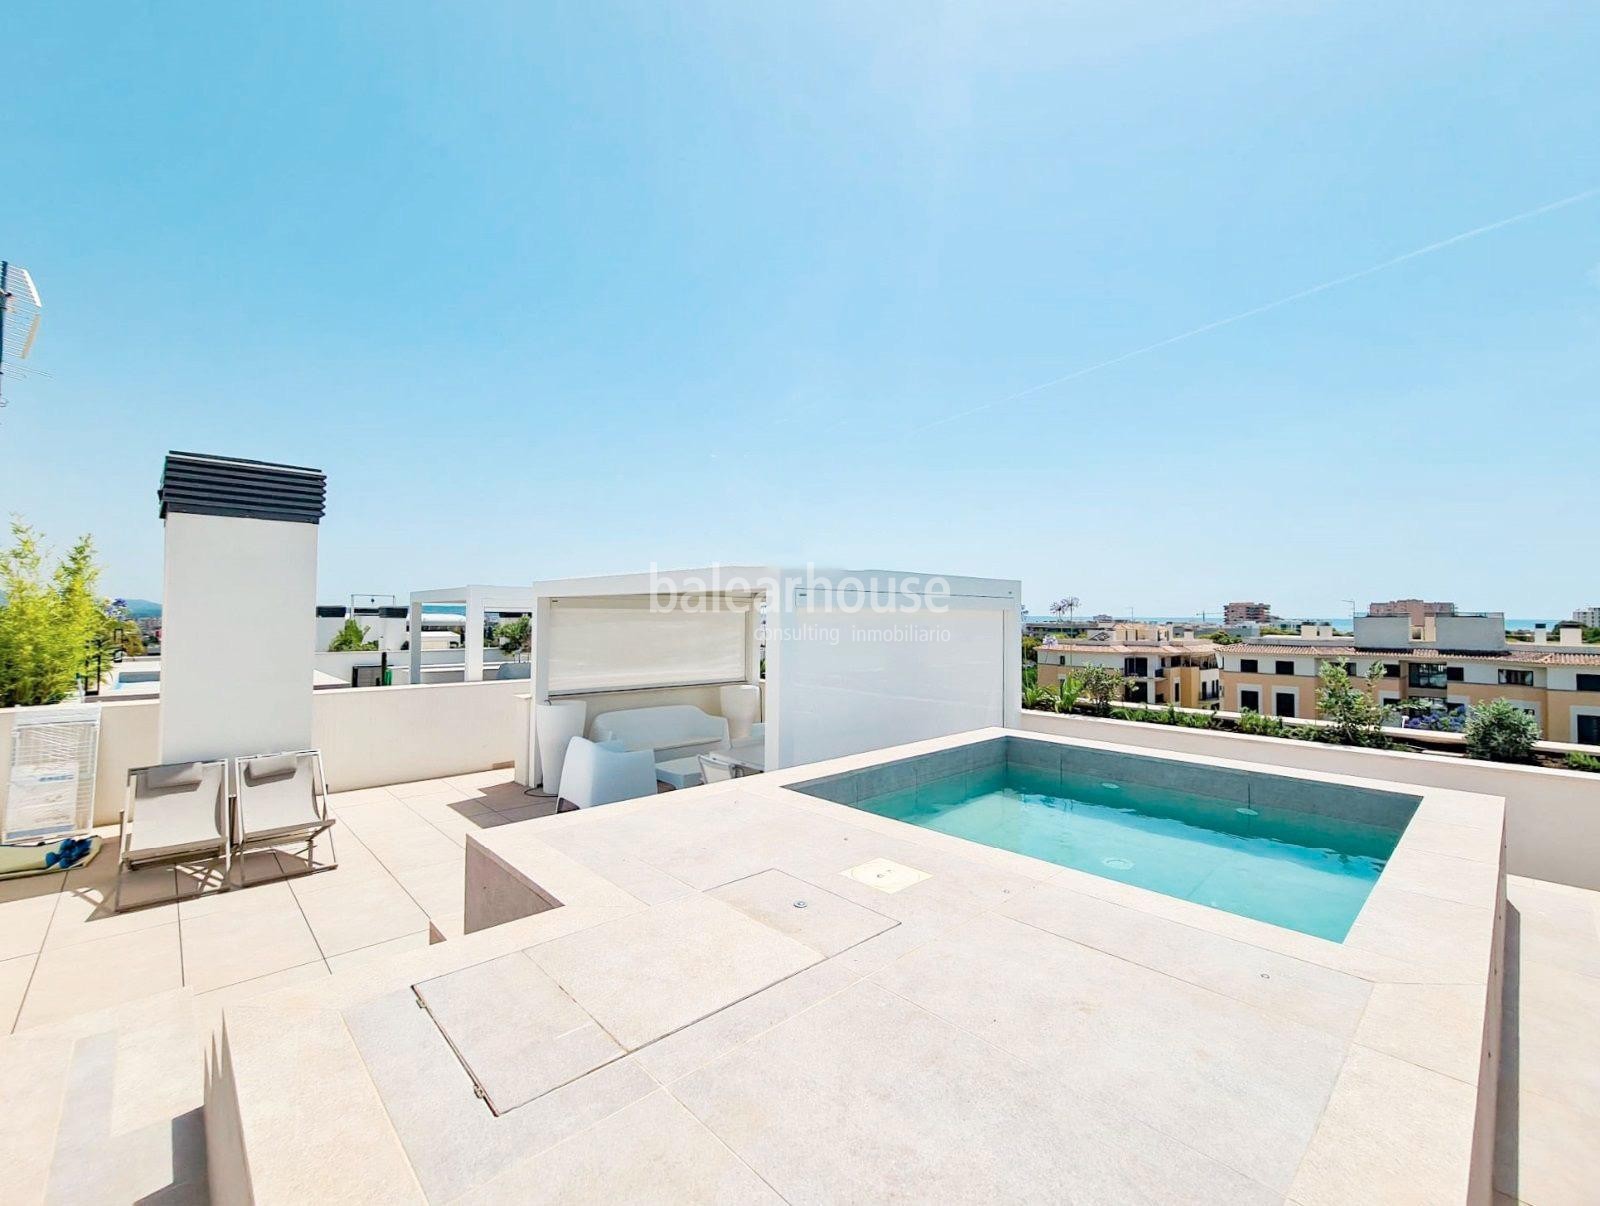 Excellent new south facing penthouse with solarium and private pool in the school area of Palma.